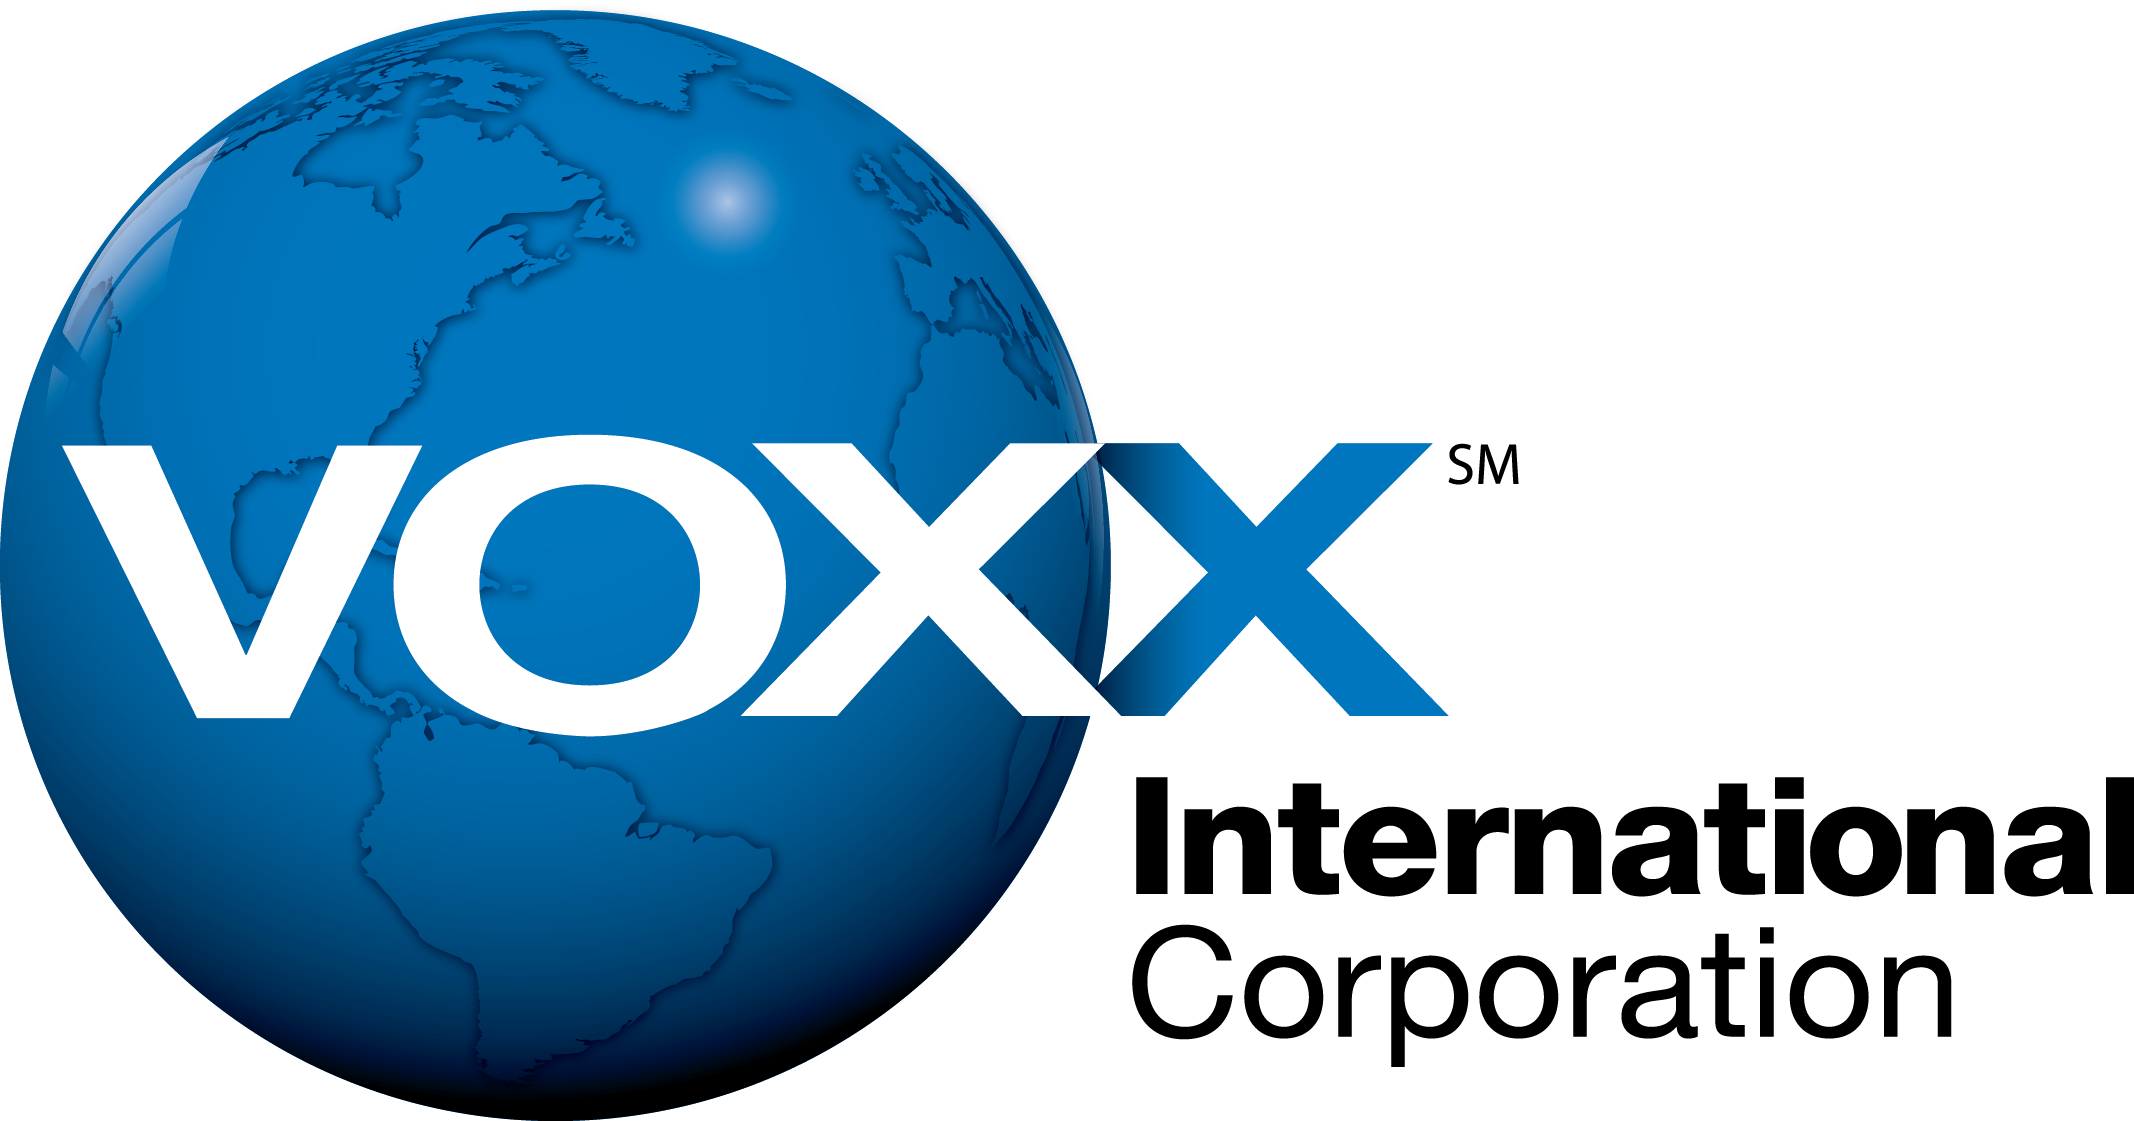 VOXX Acquires Directed’s Aftermarket Brands | THE SHOP